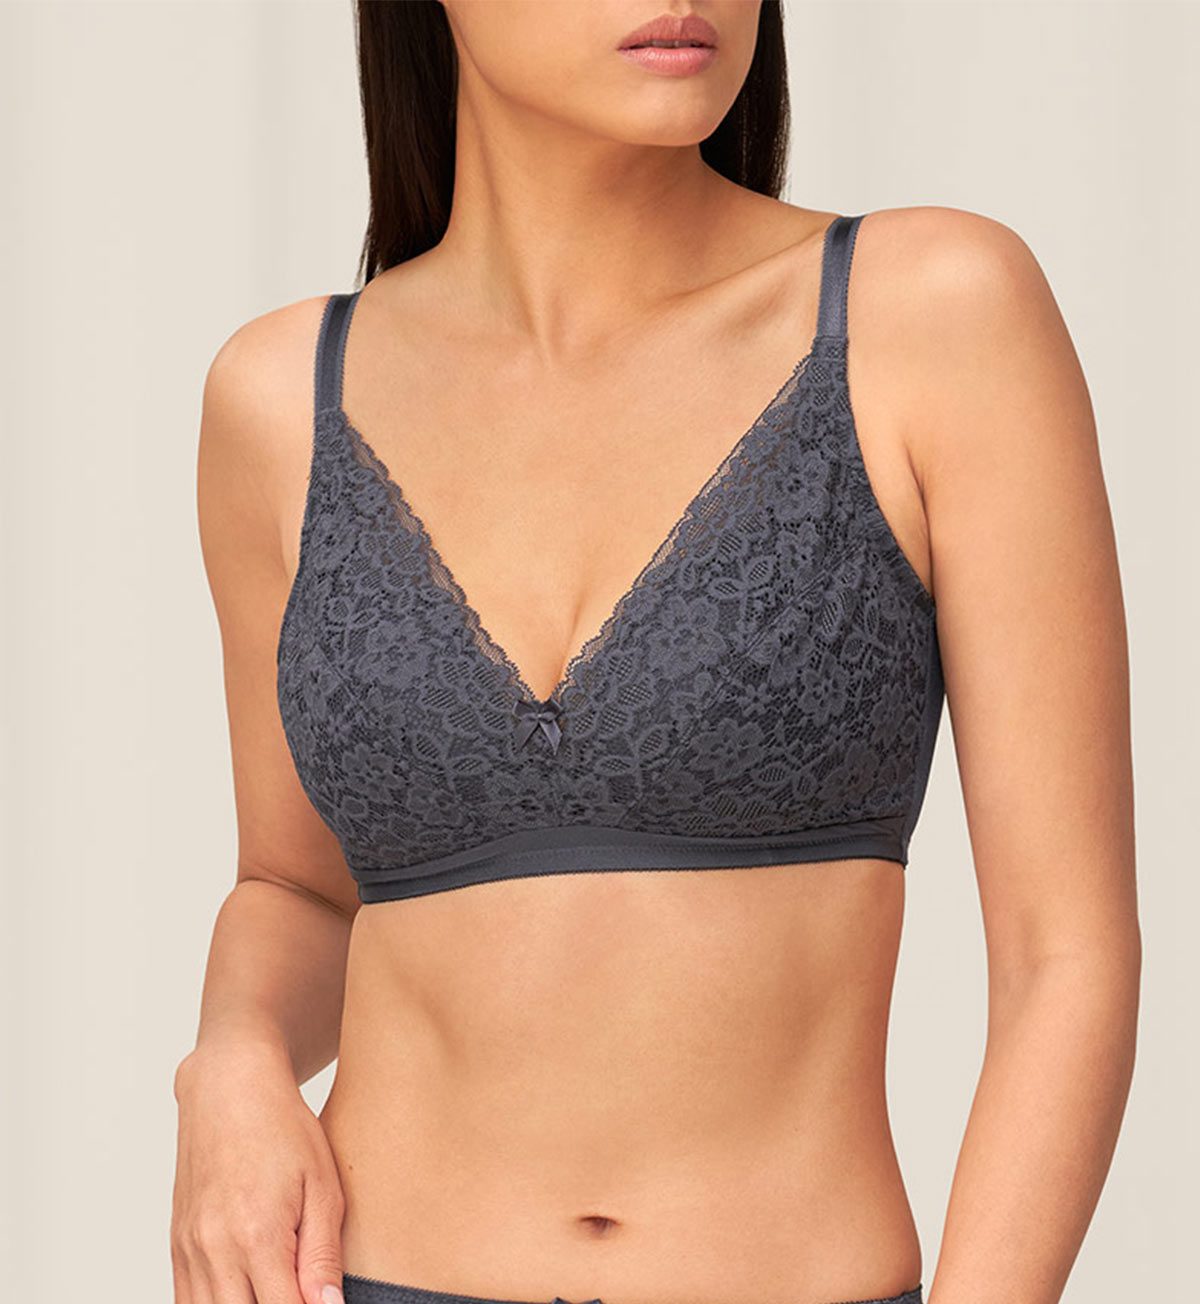 Simply Natural Beauty Non-Wired Padded Bra in Pebble Grey